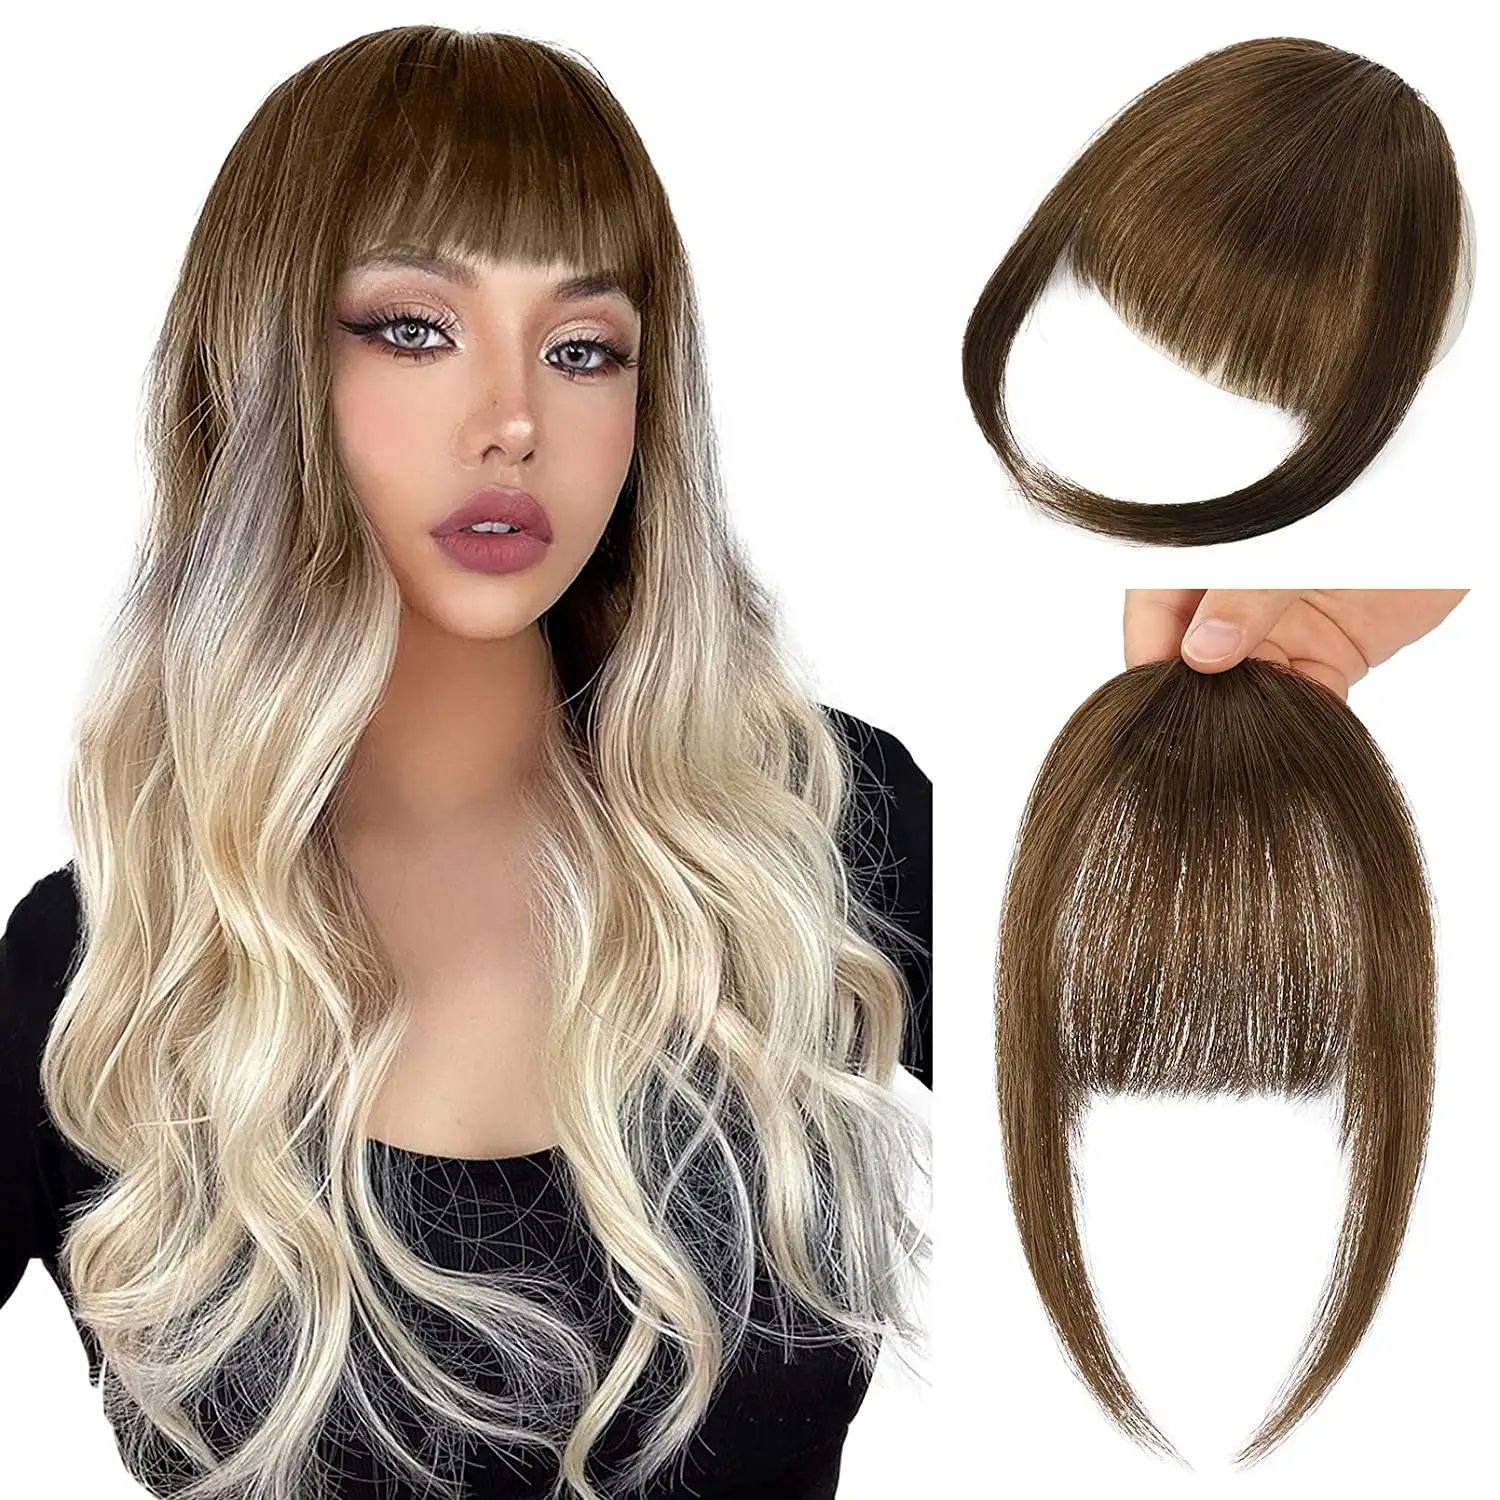 WS05 Top Selling Wholesale Silky Straight Neat Hair Bangs Synthetic Clip In Hair Bangs Fringe Hair Extension